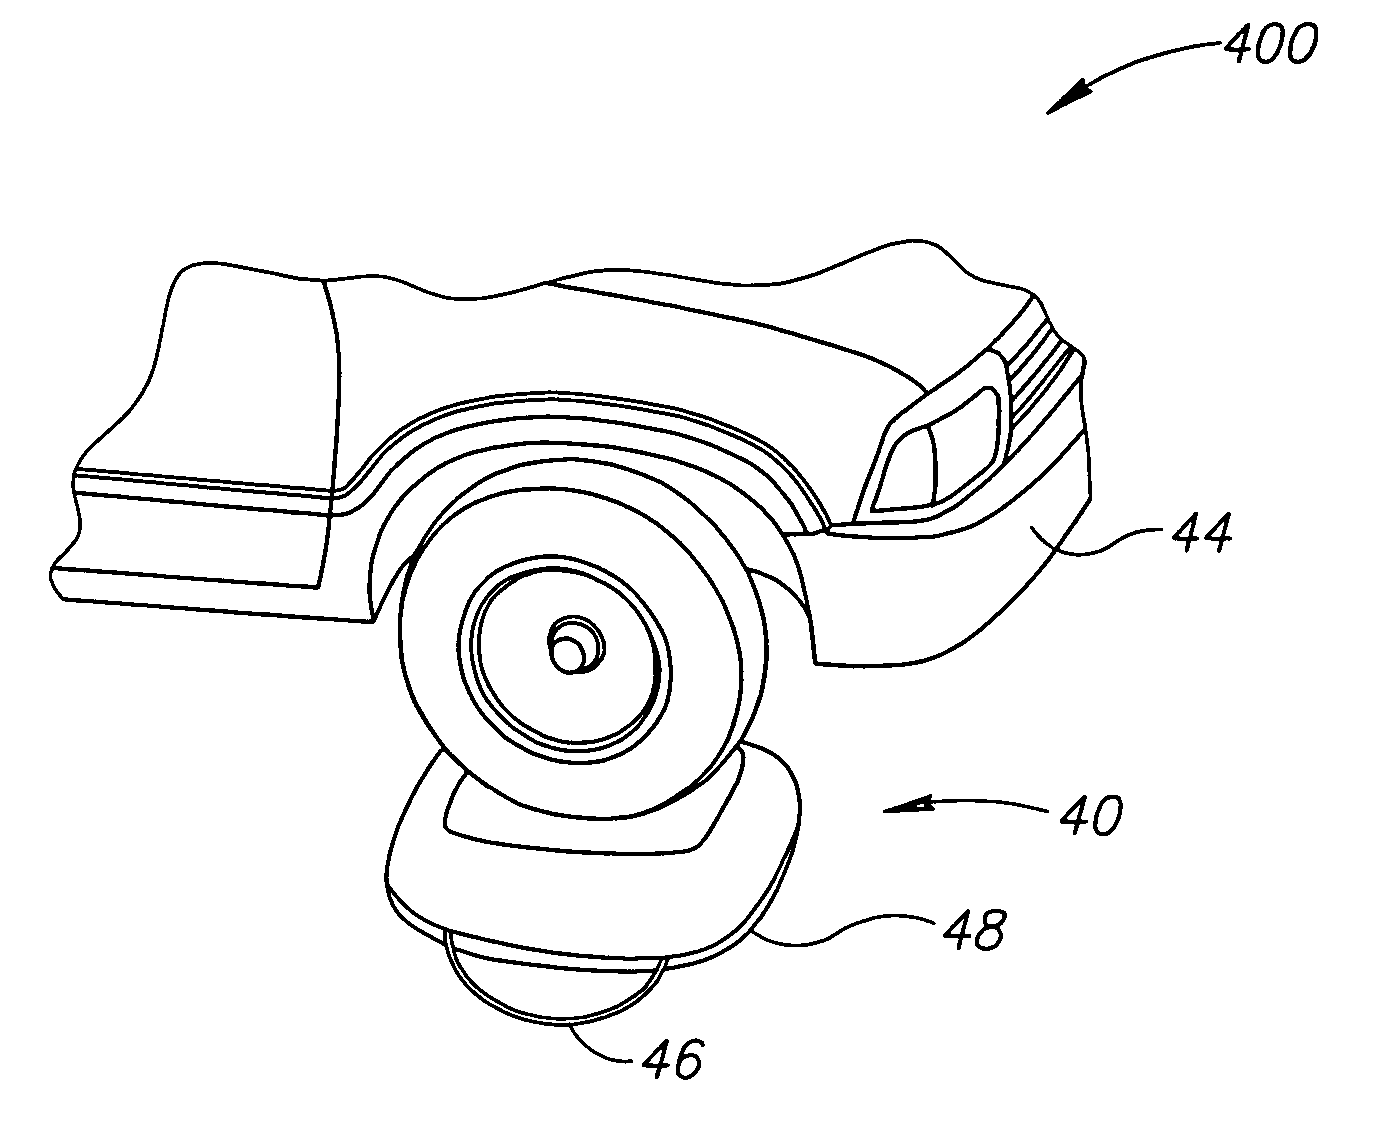 Soft support systems and methods for dynamically testing structures